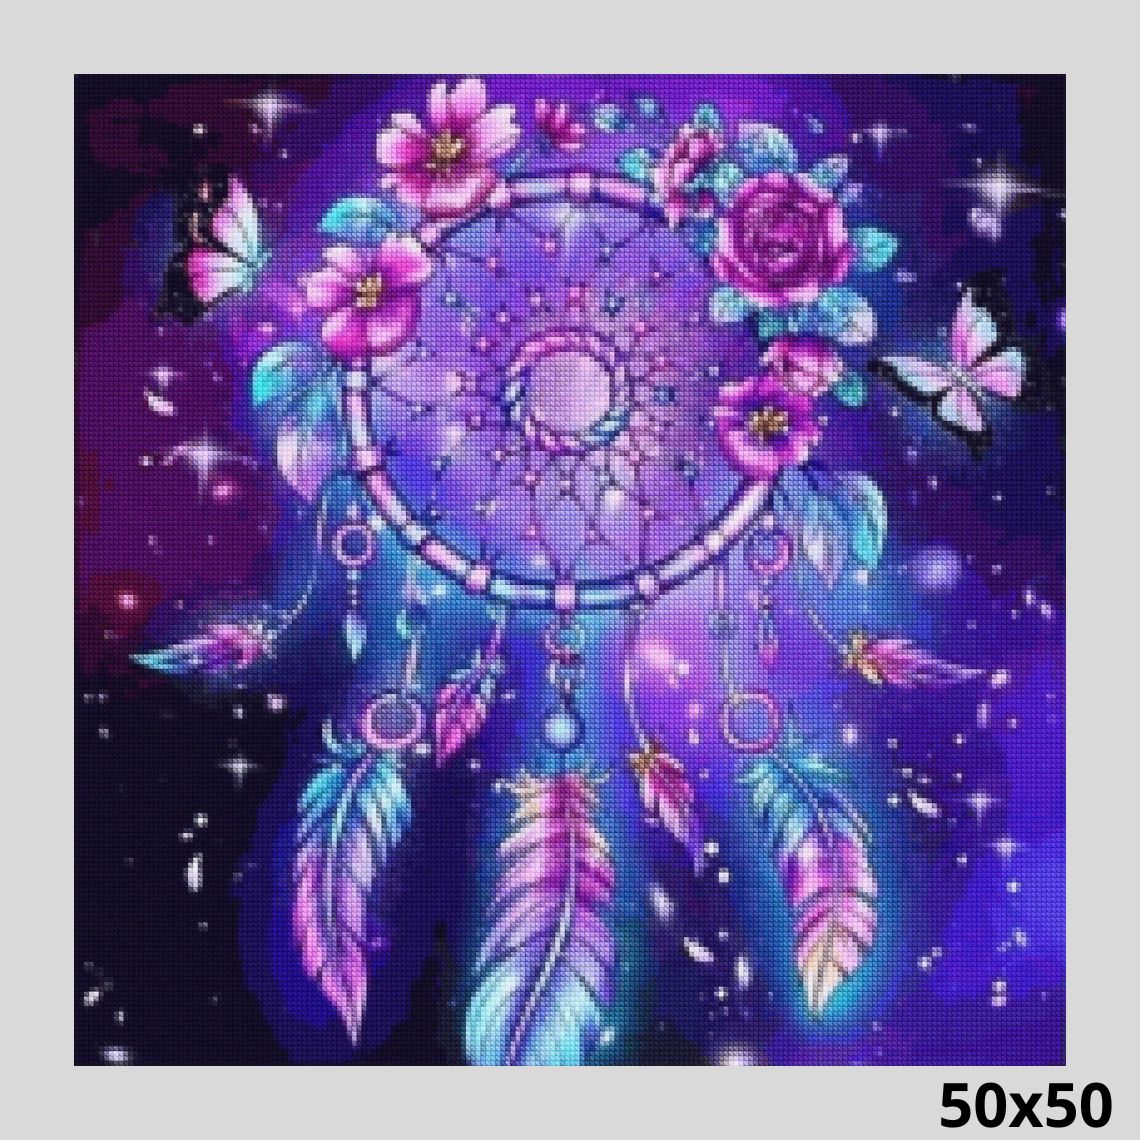 DCIDBEI Diamond Painting Kits 12x16 inch Dream Catcher Diamond Painting  Dreamcatcher Kit Trippy Diamond Art Gem Painting Kit Adults'  Paint-By-Number